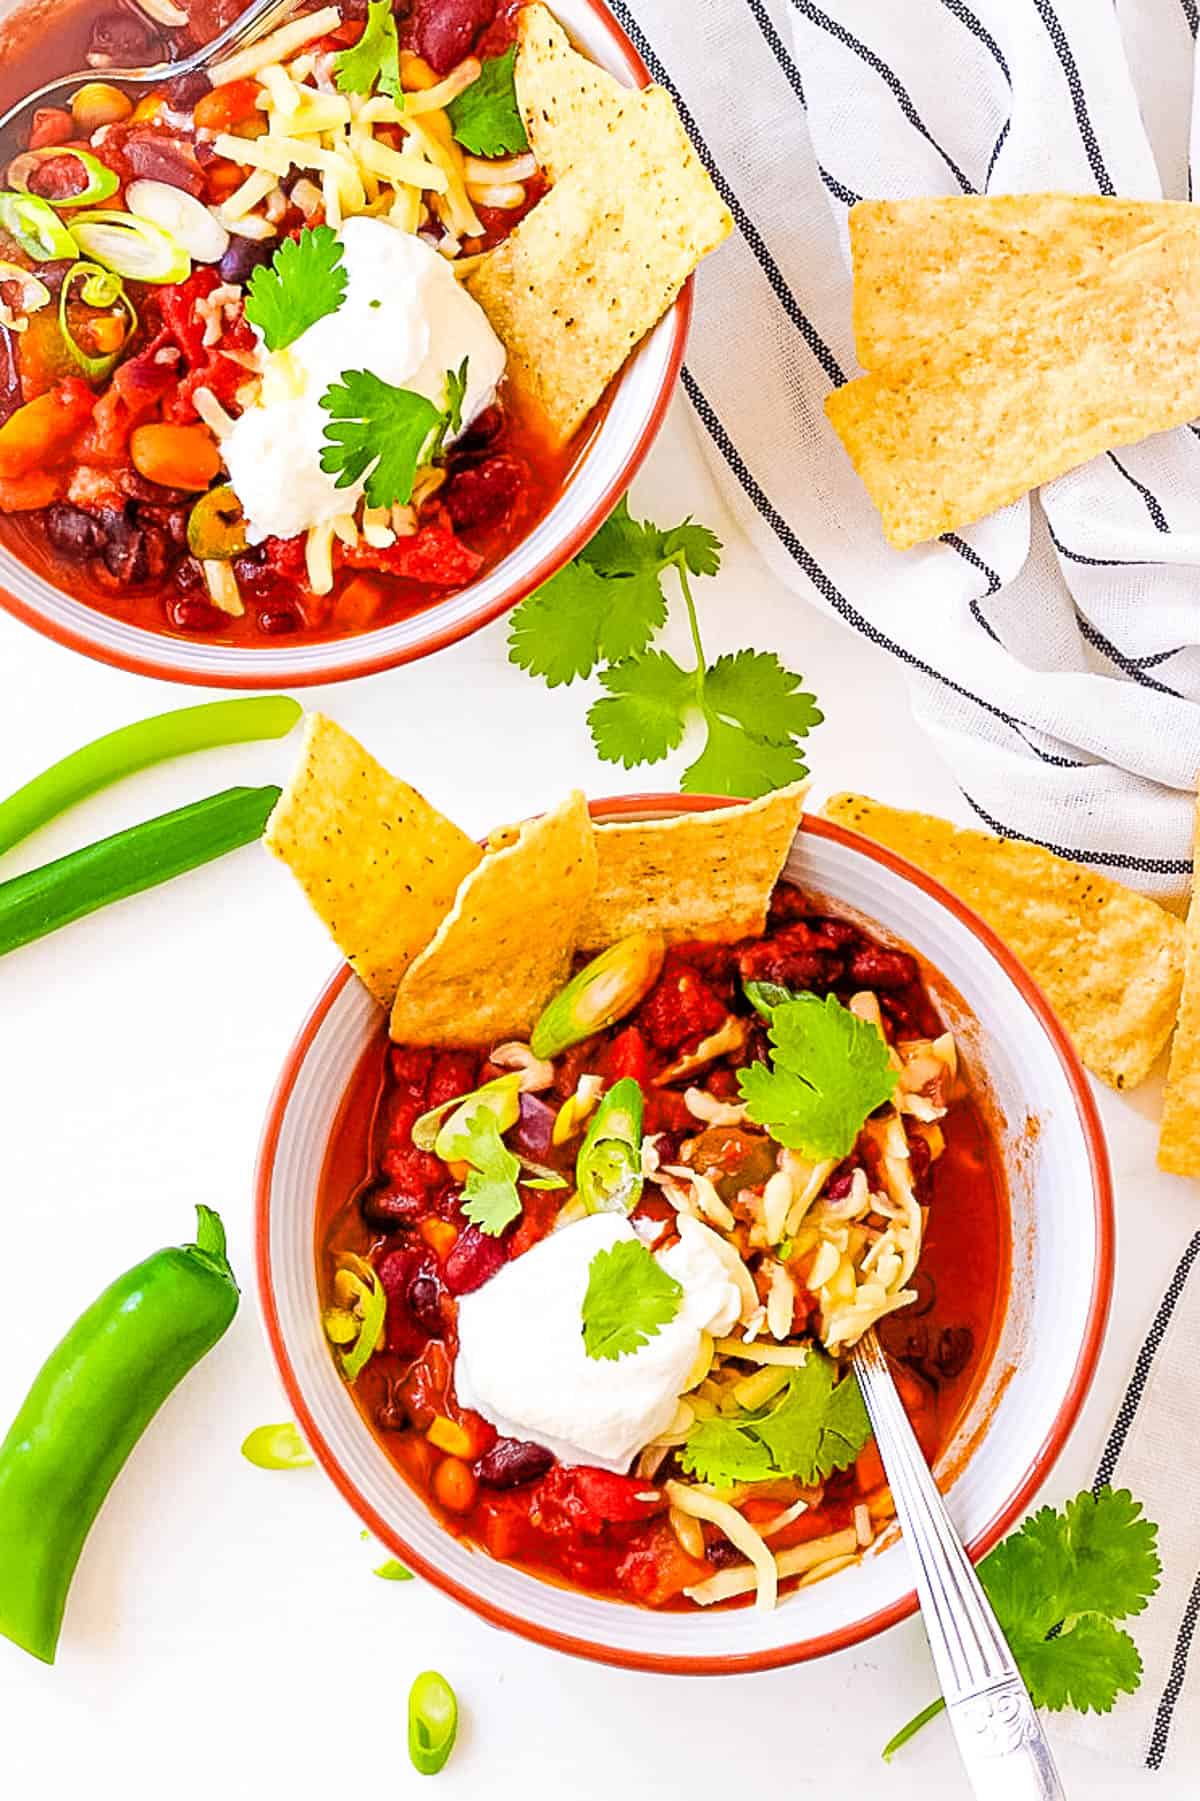 Easy Instant Pot vegetarian chili, served in a bowl garnished with green onions, cheese, sour cream and tortilla chips.